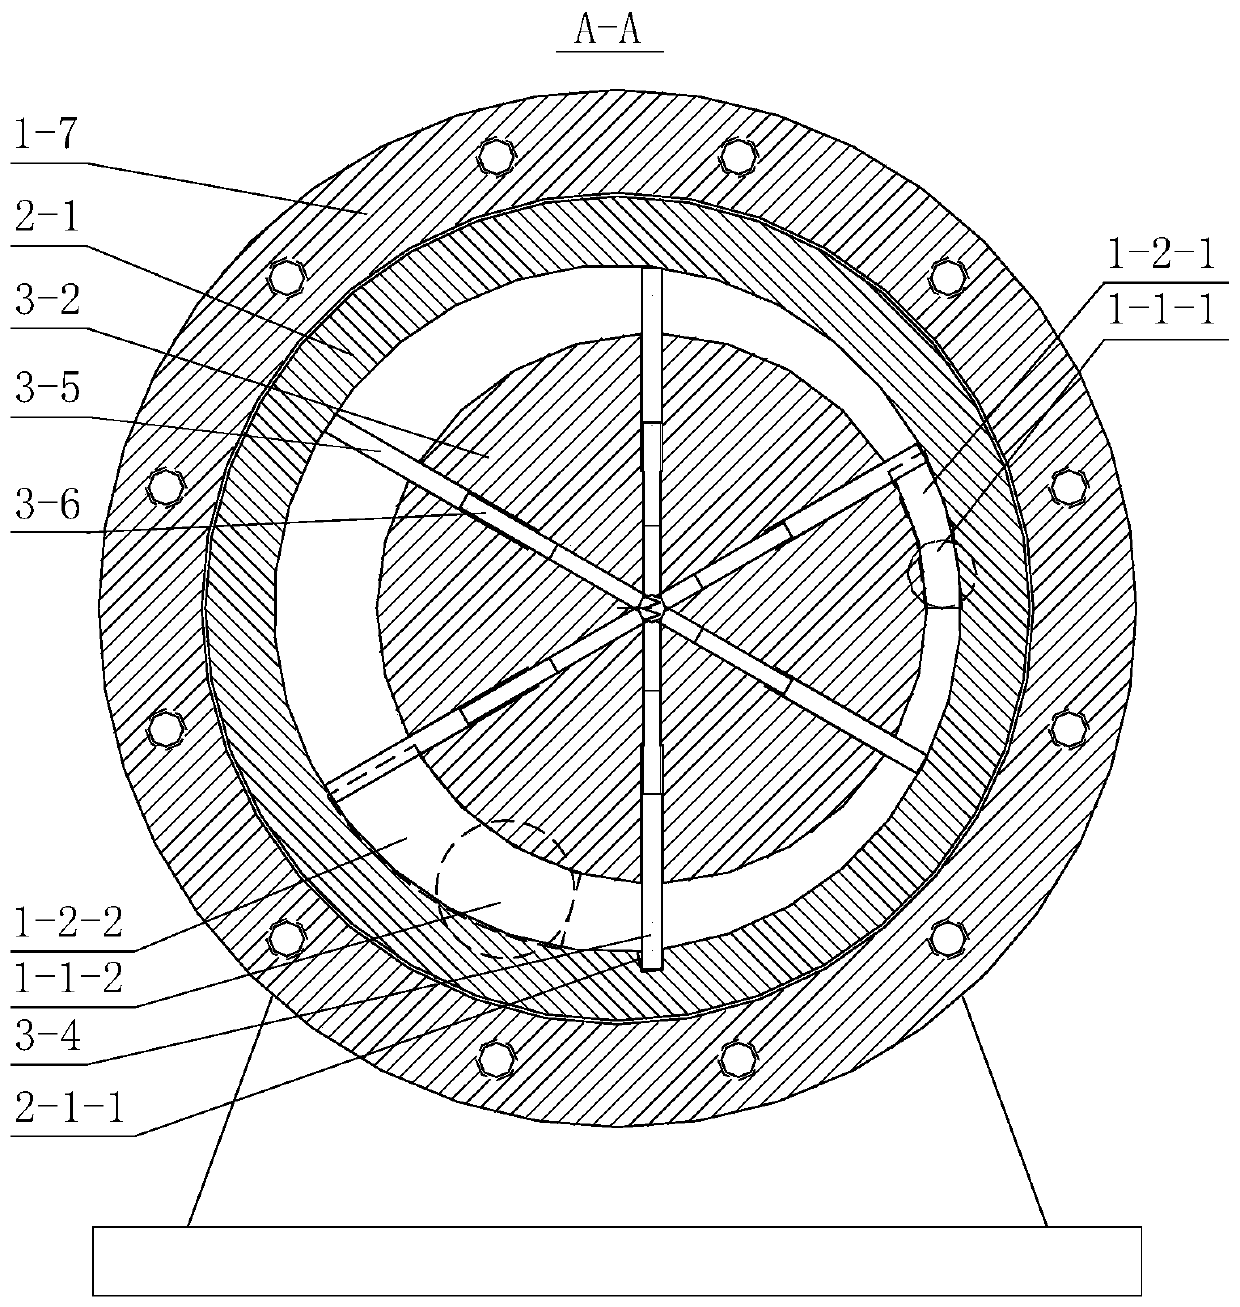 Sliding vane expander comprising cylinder rotated with rotor